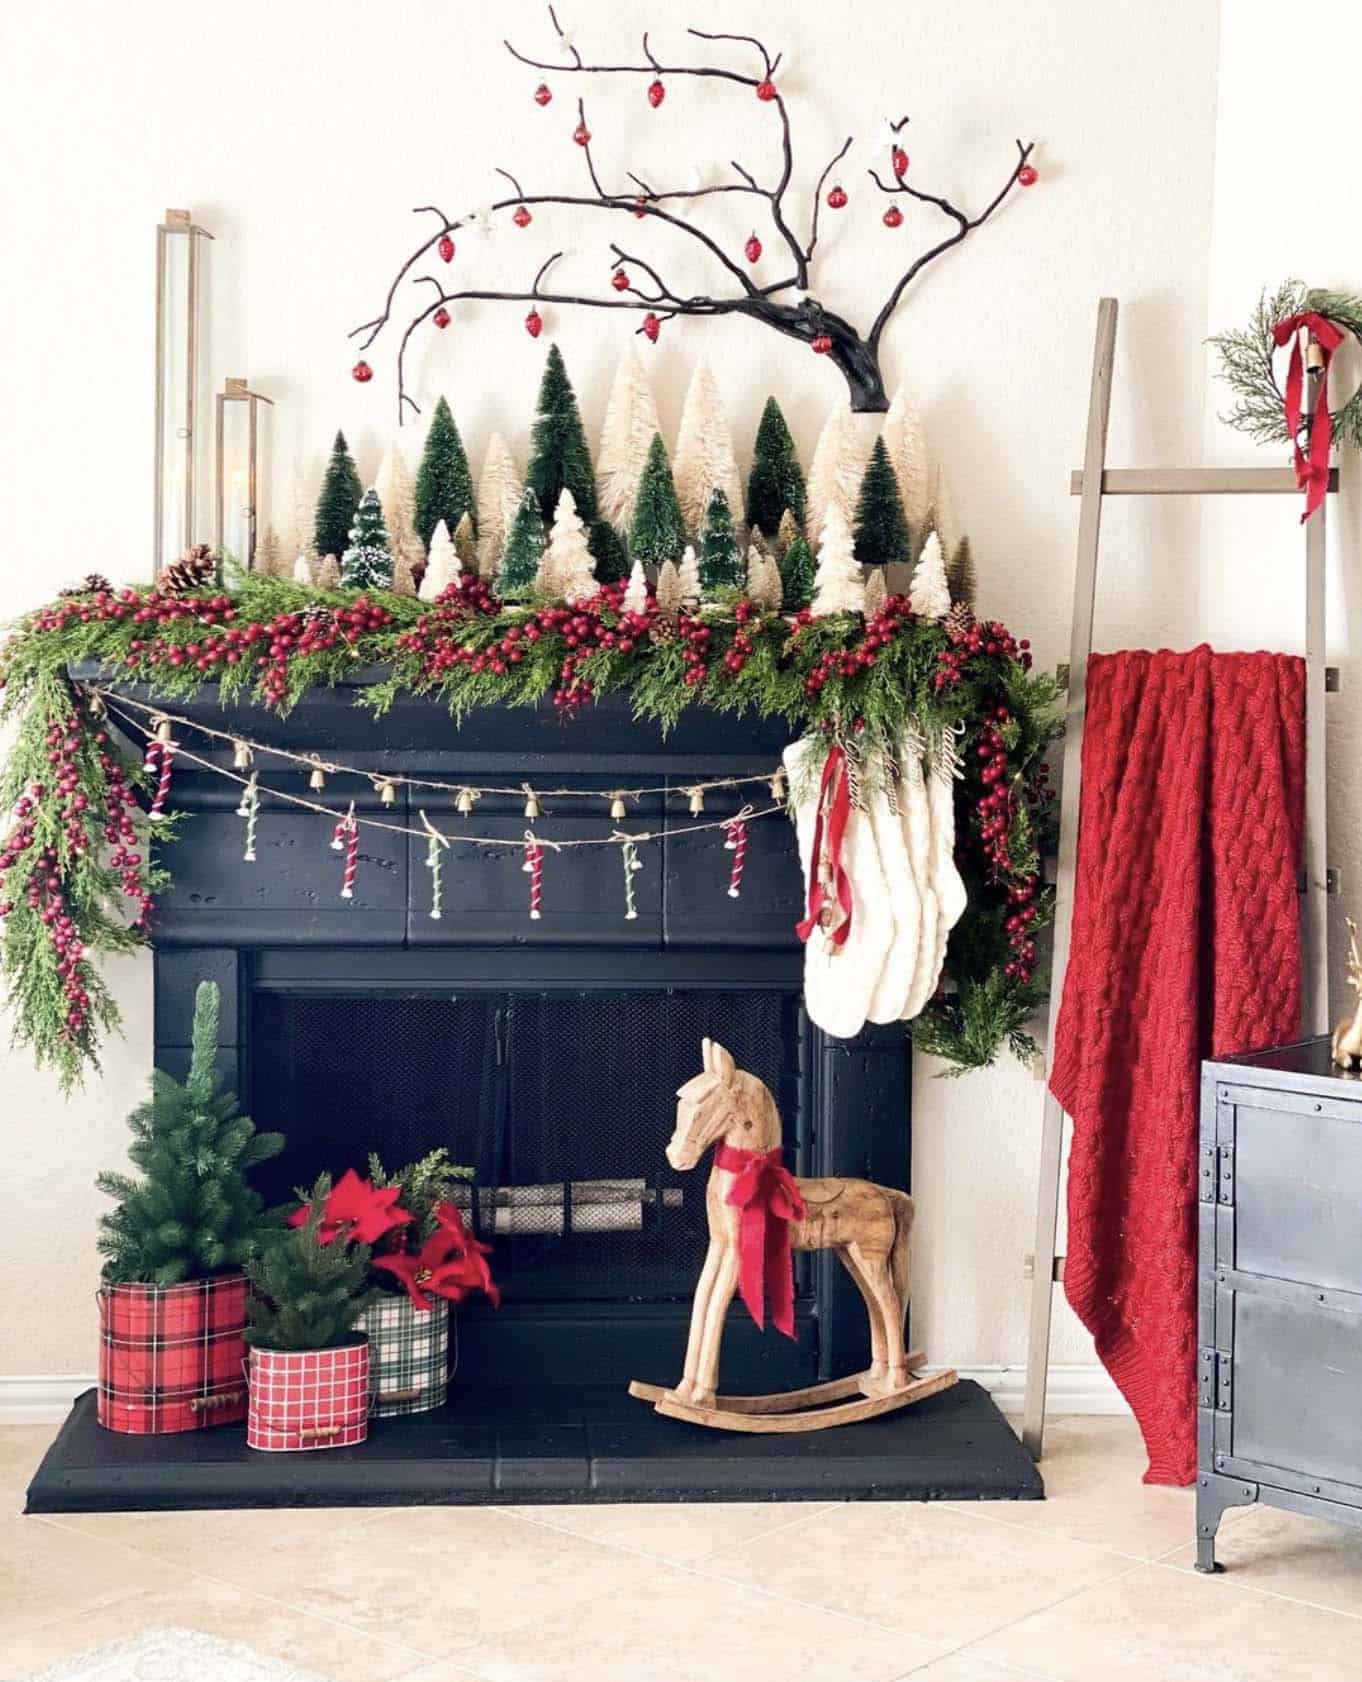 traditional red and green Christmas decorations around the fireplace mantel